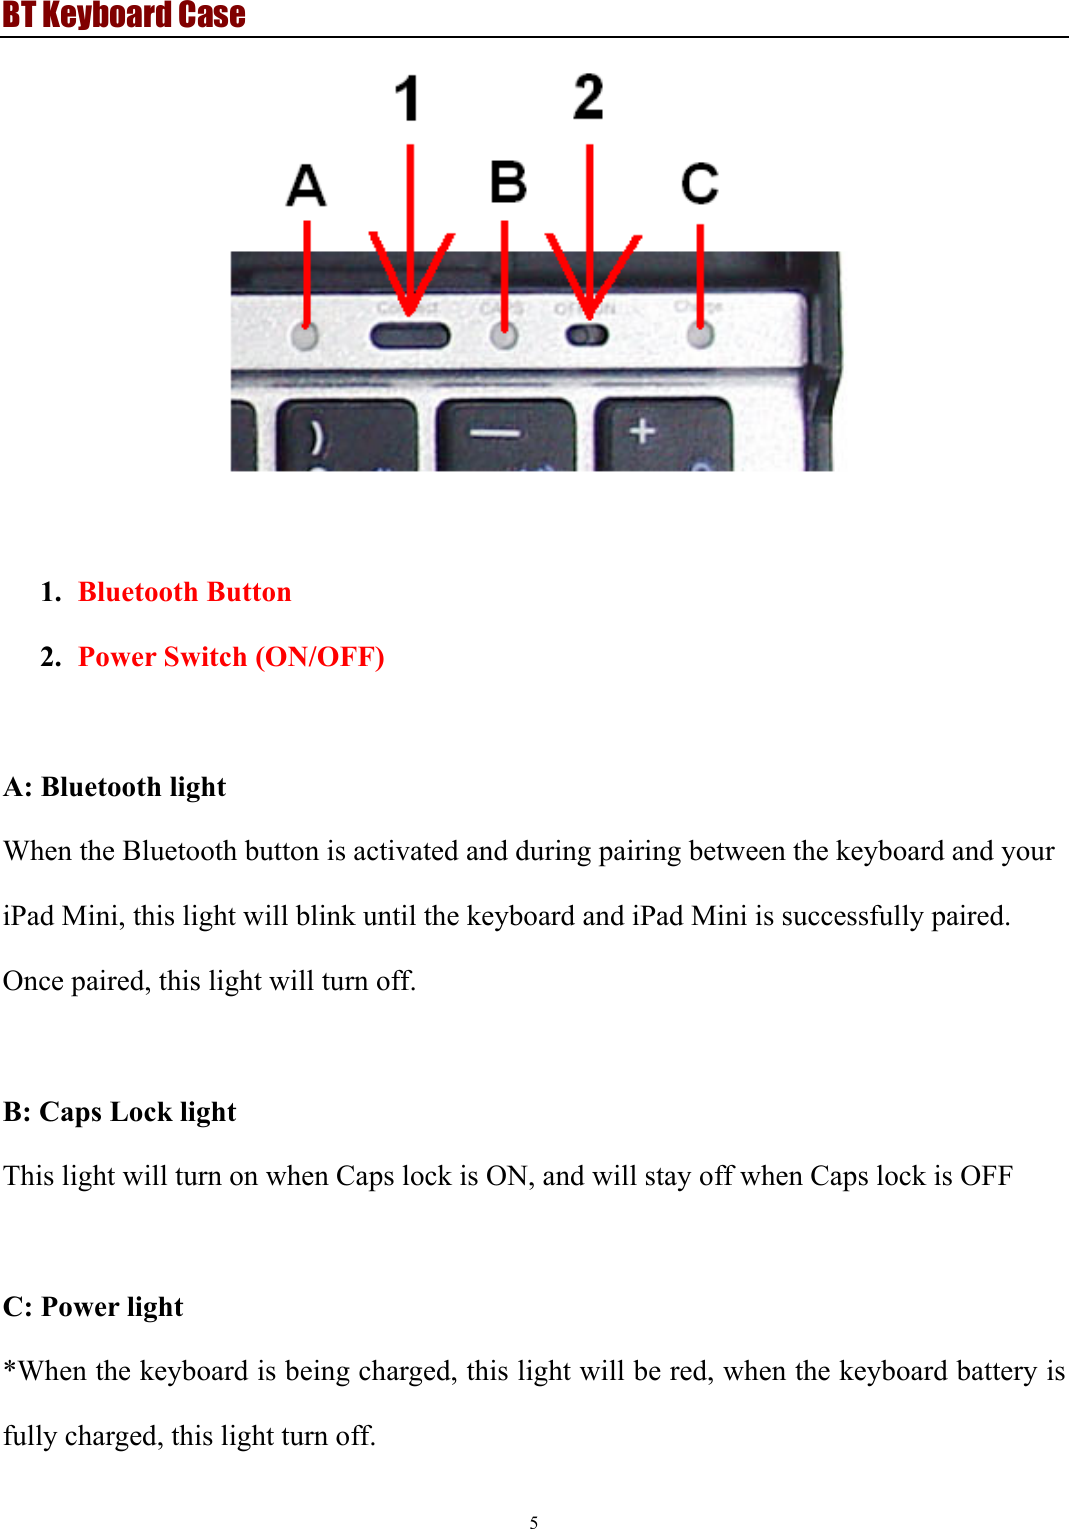 BT Keyboard Case 5    1. Bluetooth Button 2. Power Switch (ON/OFF)  A: Bluetooth light   When the Bluetooth button is activated and during pairing between the keyboard and your iPad Mini, this light will blink until the keyboard and iPad Mini is successfully paired.   Once paired, this light will turn off.  B: Caps Lock light   This light will turn on when Caps lock is ON, and will stay off when Caps lock is OFF  C: Power light   *When the keyboard is being charged, this light will be red, when the keyboard battery is fully charged, this light turn off. 